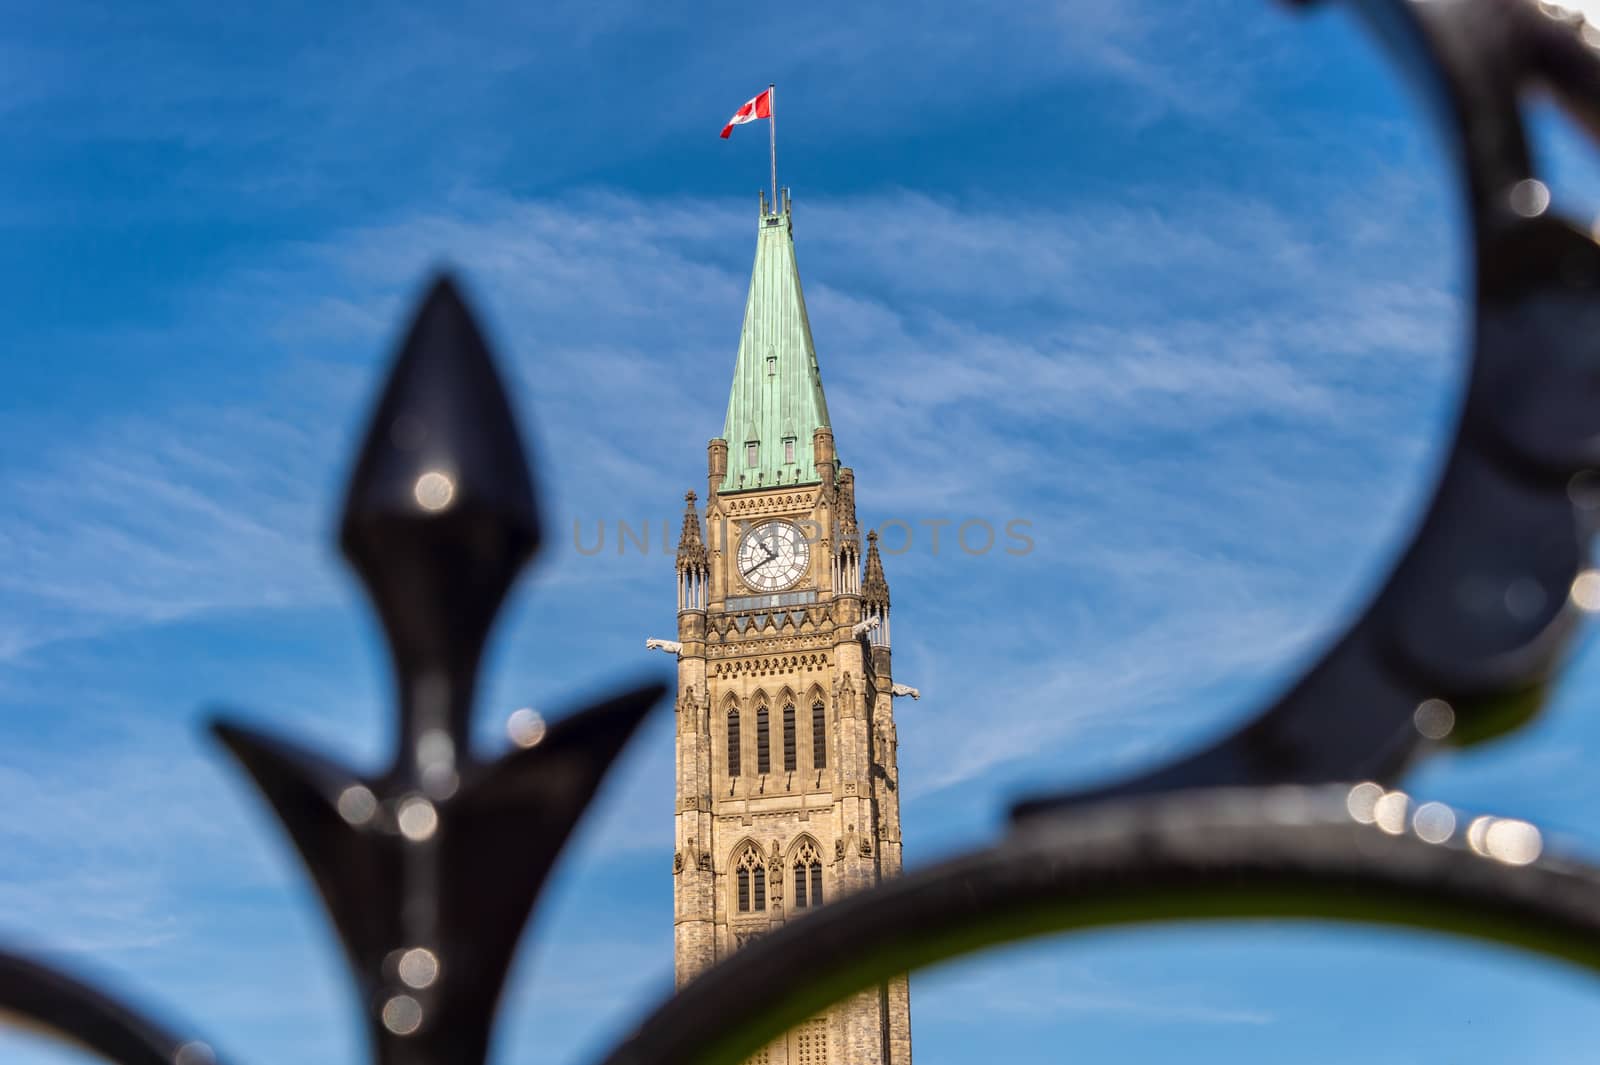 Peace tower of the Canadian Parliament